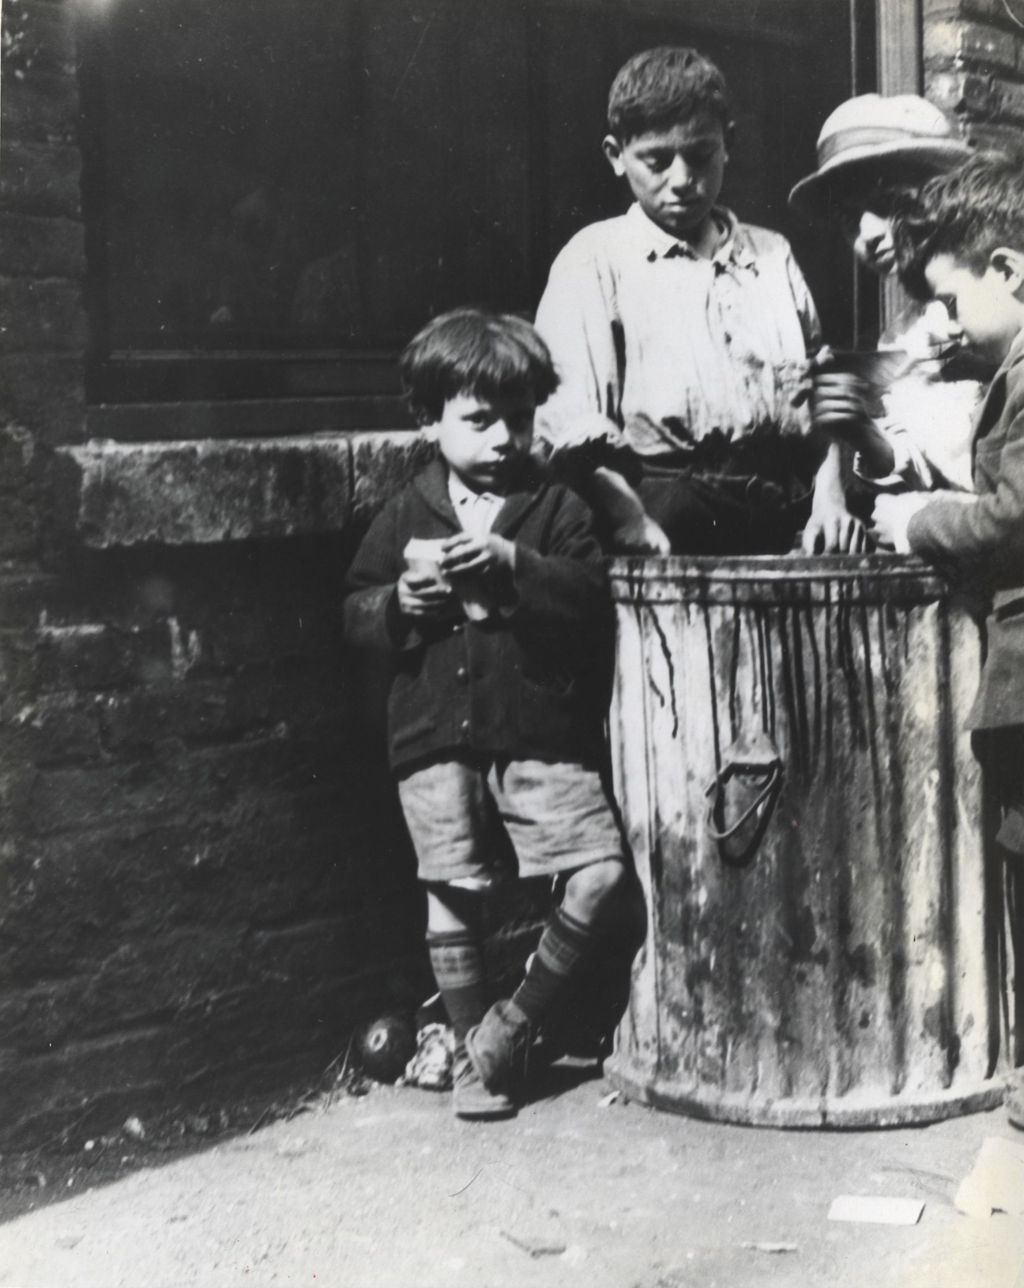 Four boys surround a garbage can in alley